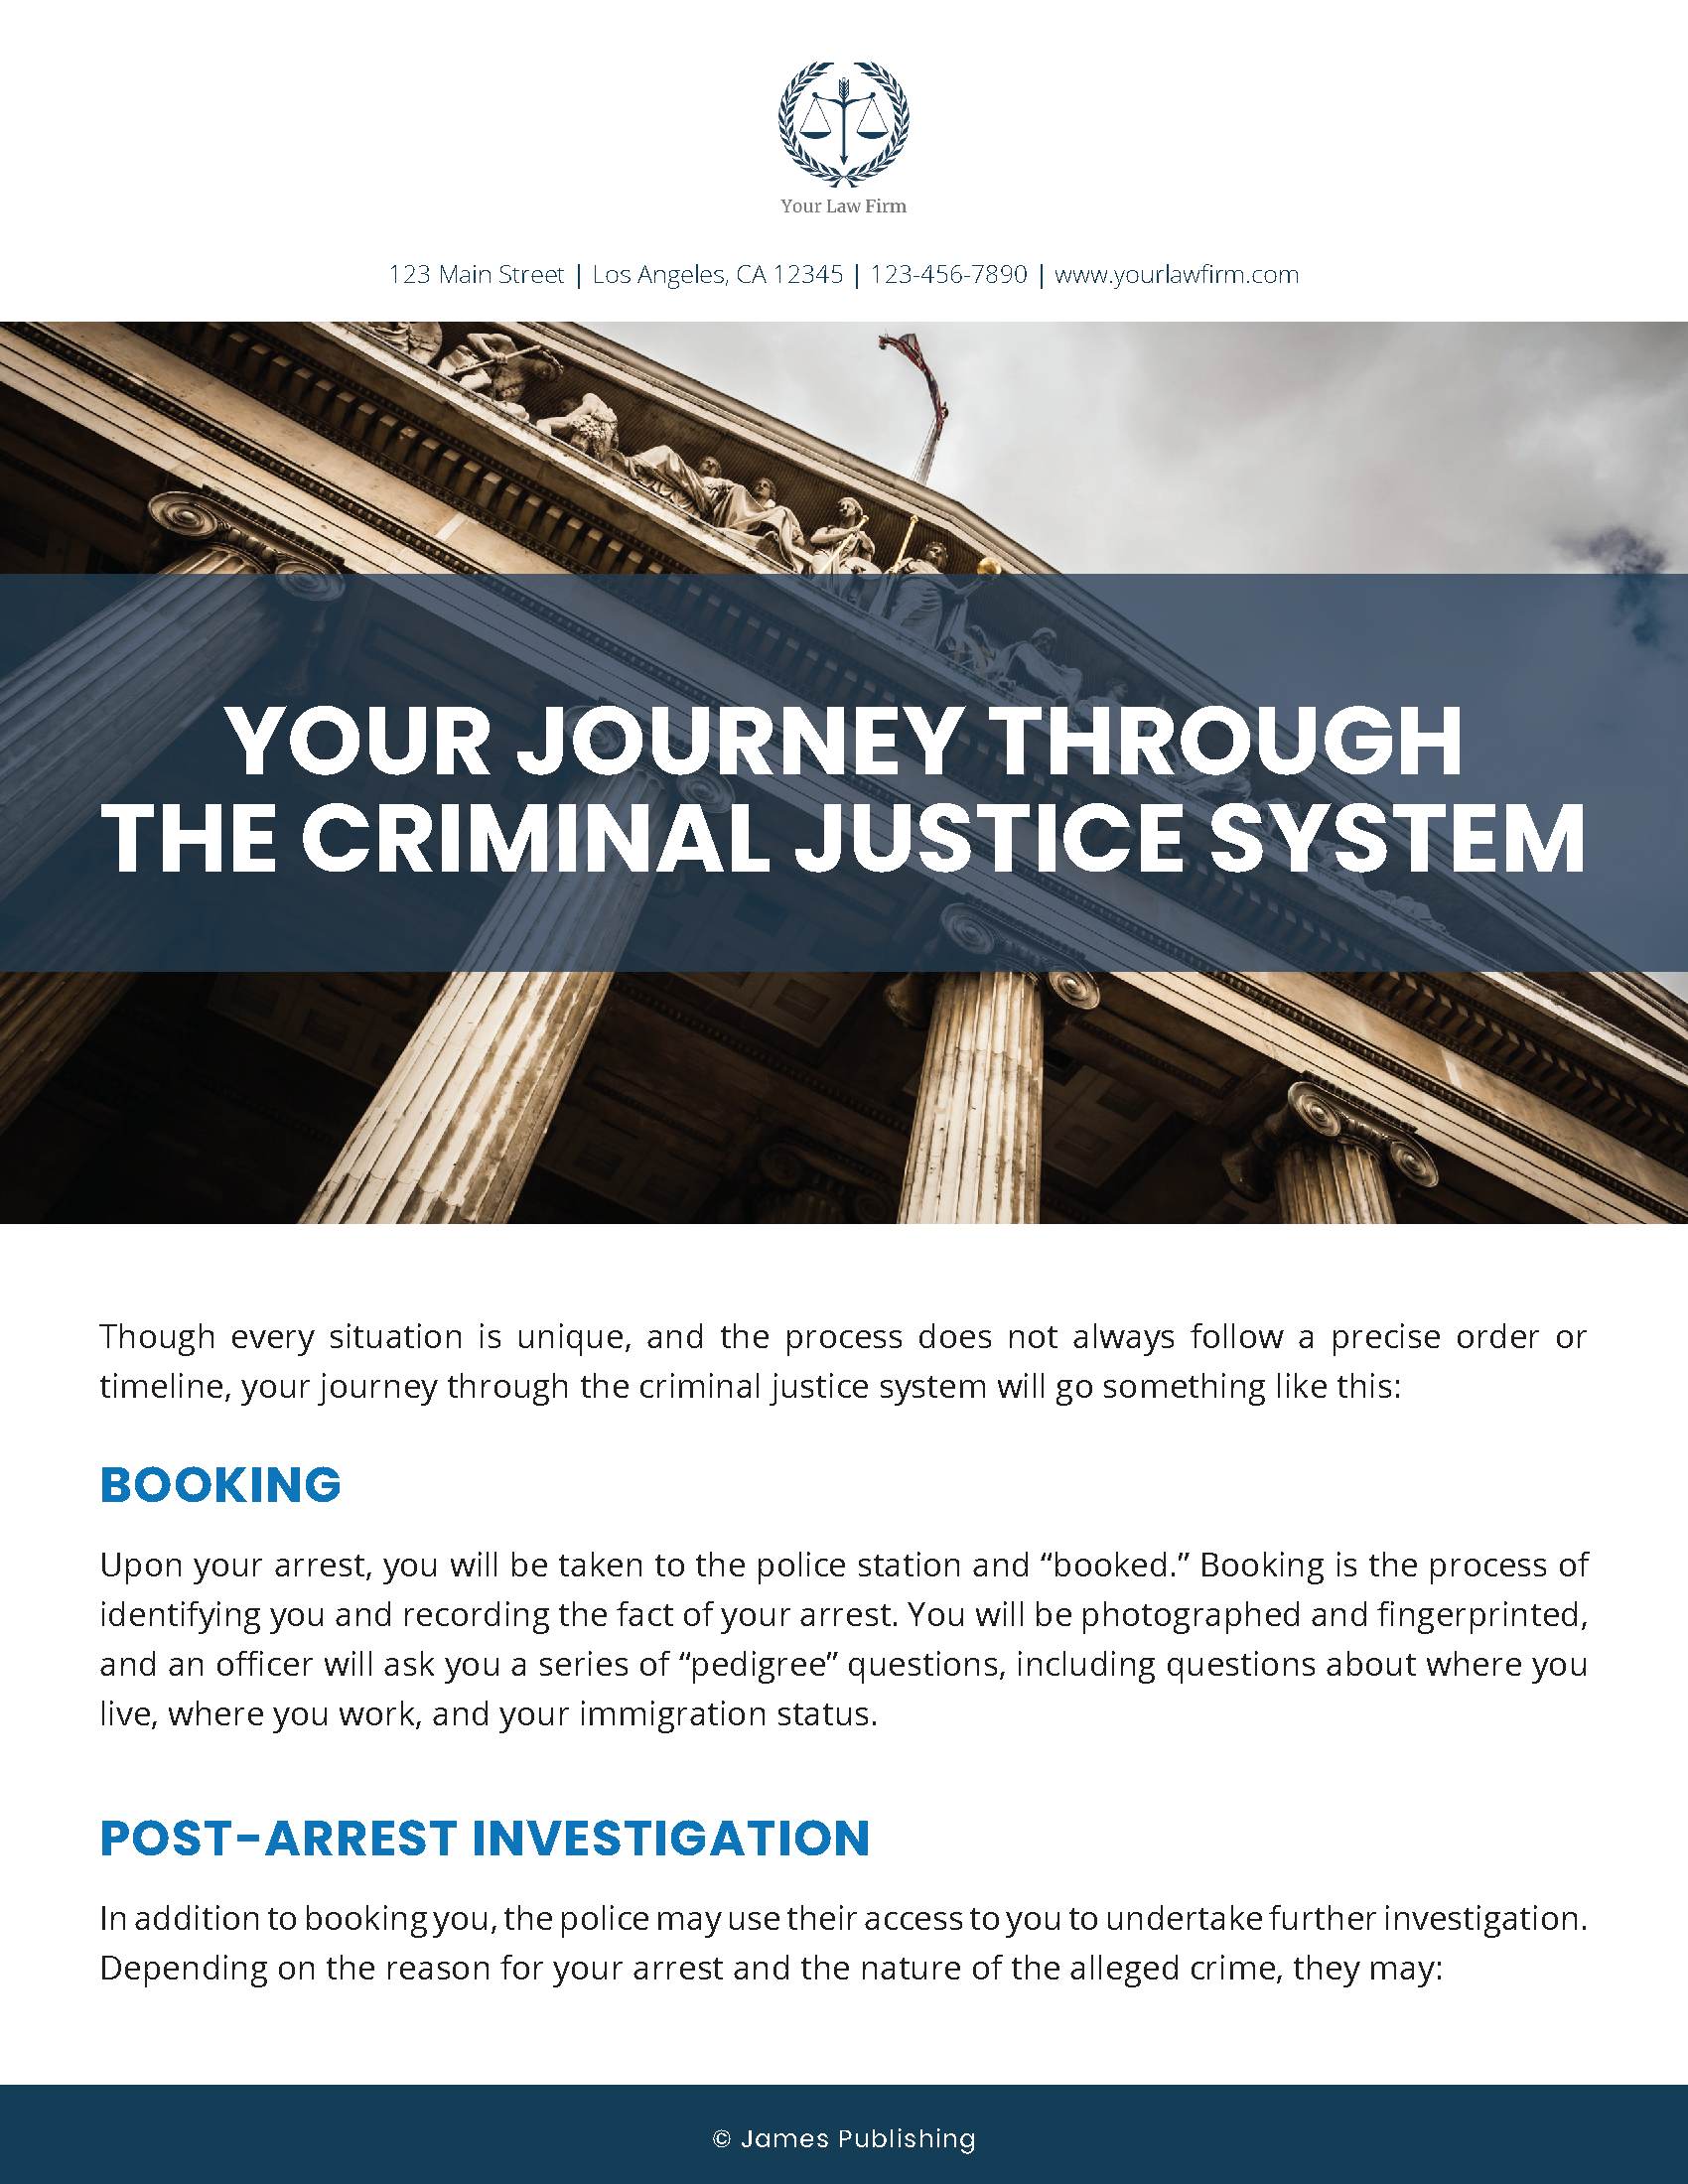 CRIM-31 Your Journey Through the Criminal Justice System